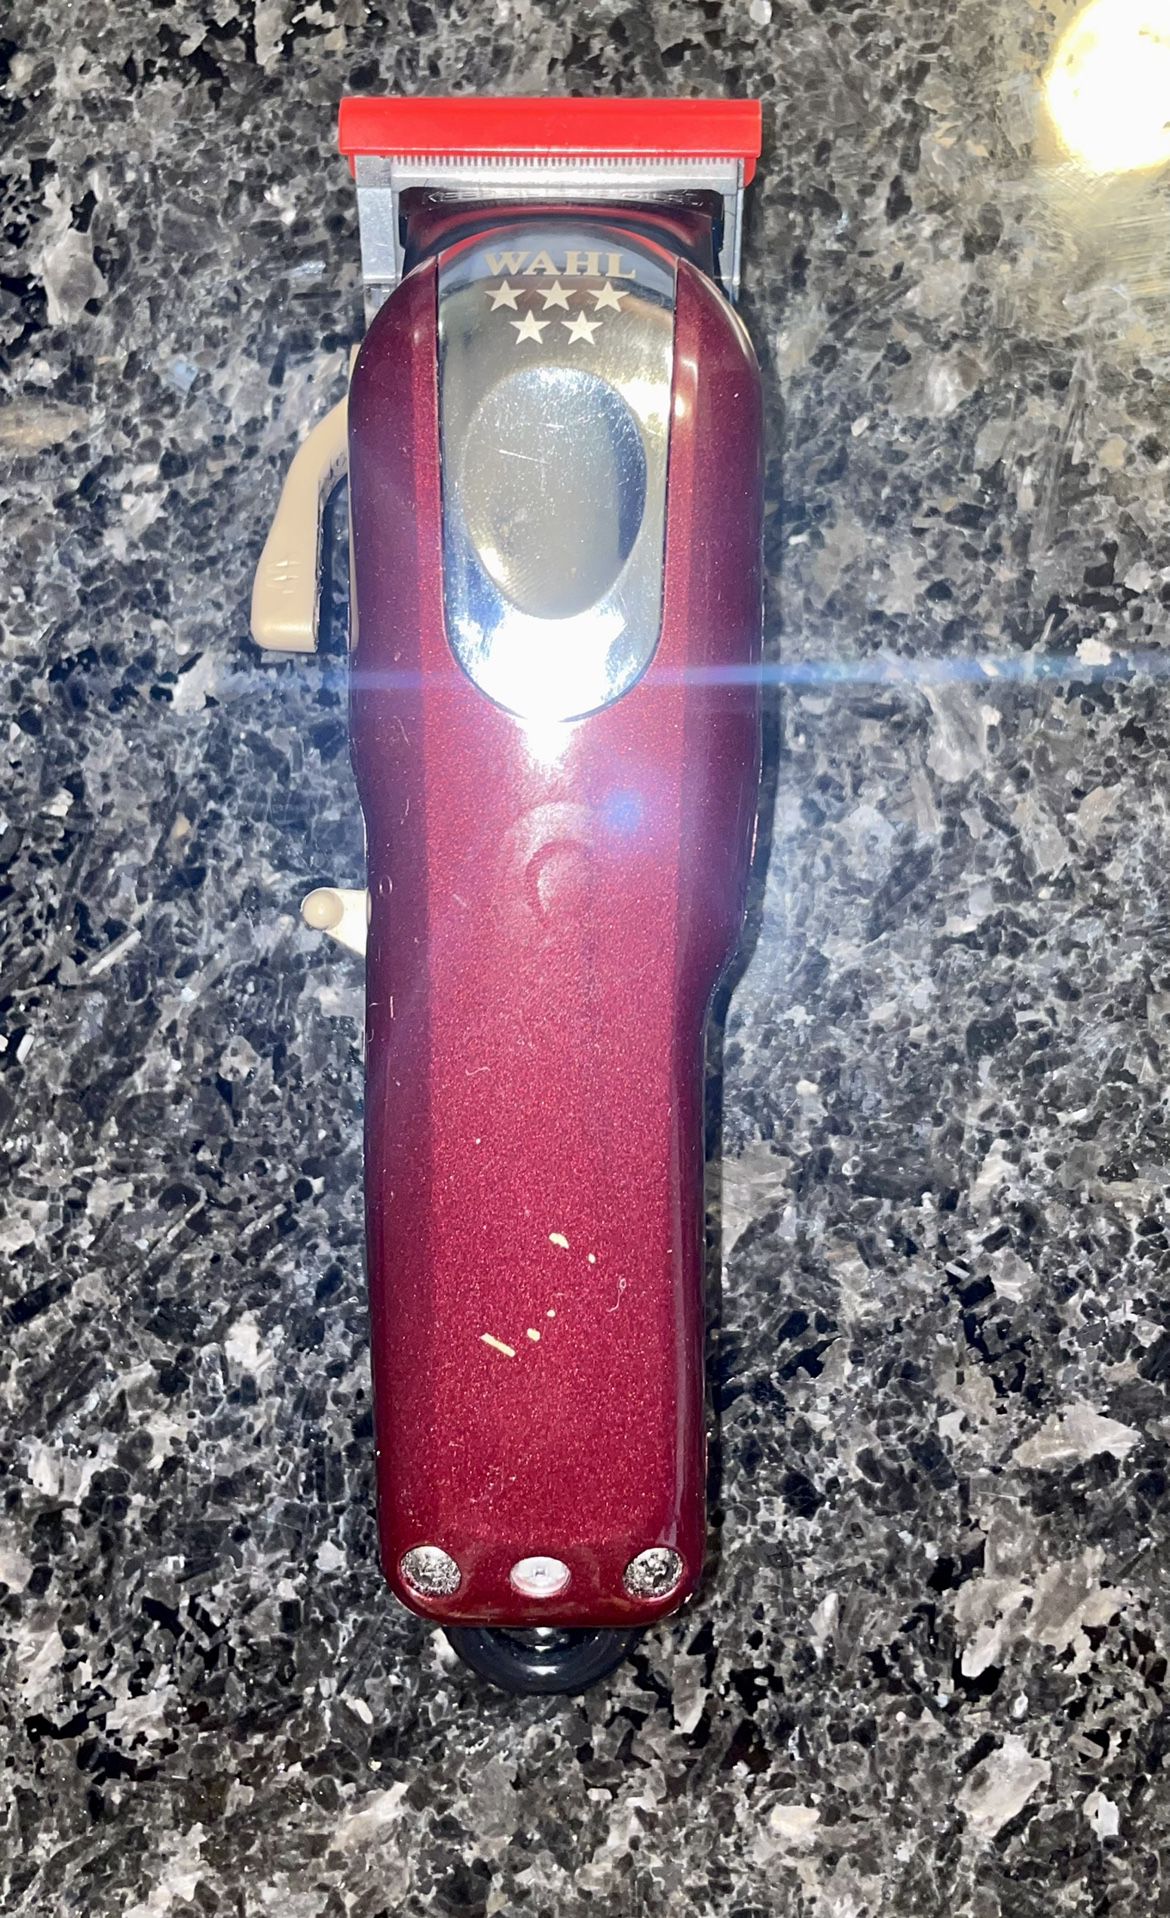 Barber Clippers And Trimmers “Almost Mint Condition”